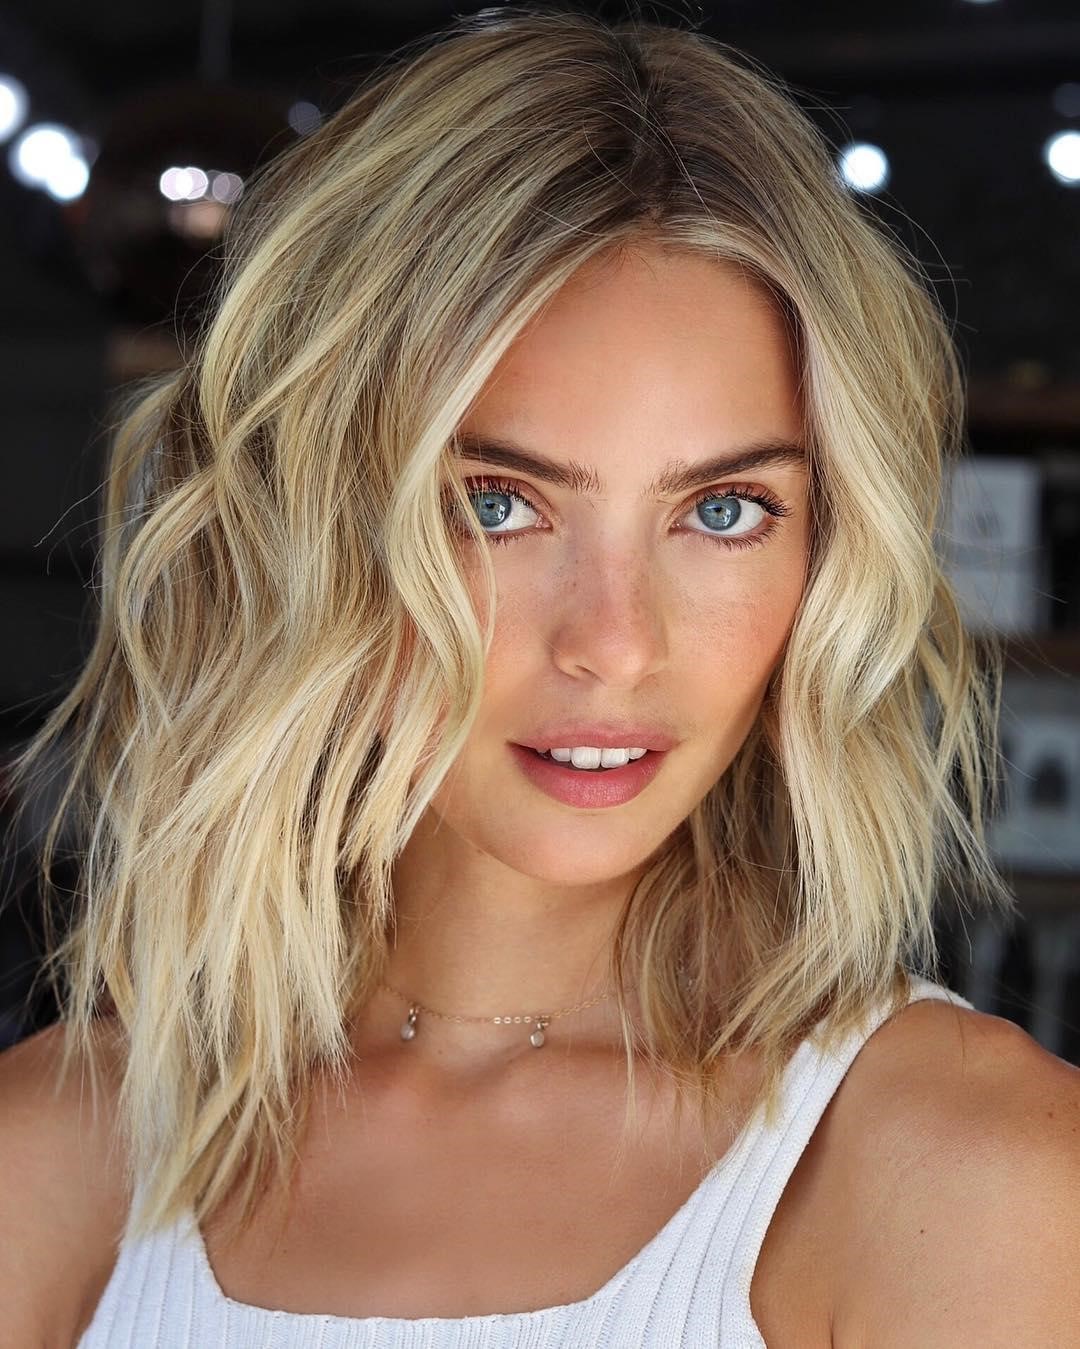 100+ Stunning Haircuts for Women to Try - Human Hair Exim